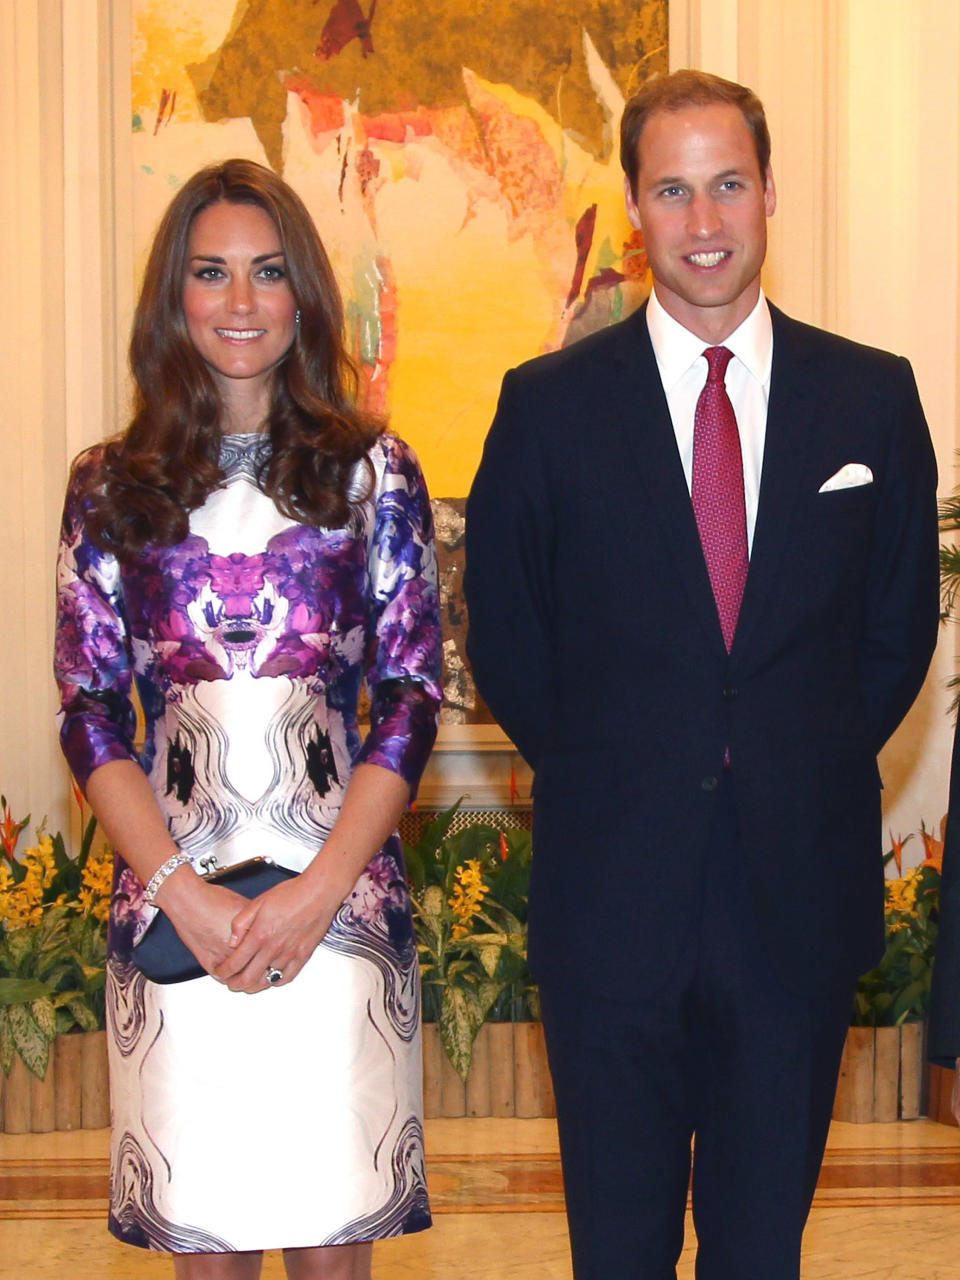 Kate Middleton and Prince William attend the Istana for a state dinner on day 1 of their Diamond Jubilee tour, Sept. 11, 2012, in Singapore. (Photo: Samir Hussein/WireImage)